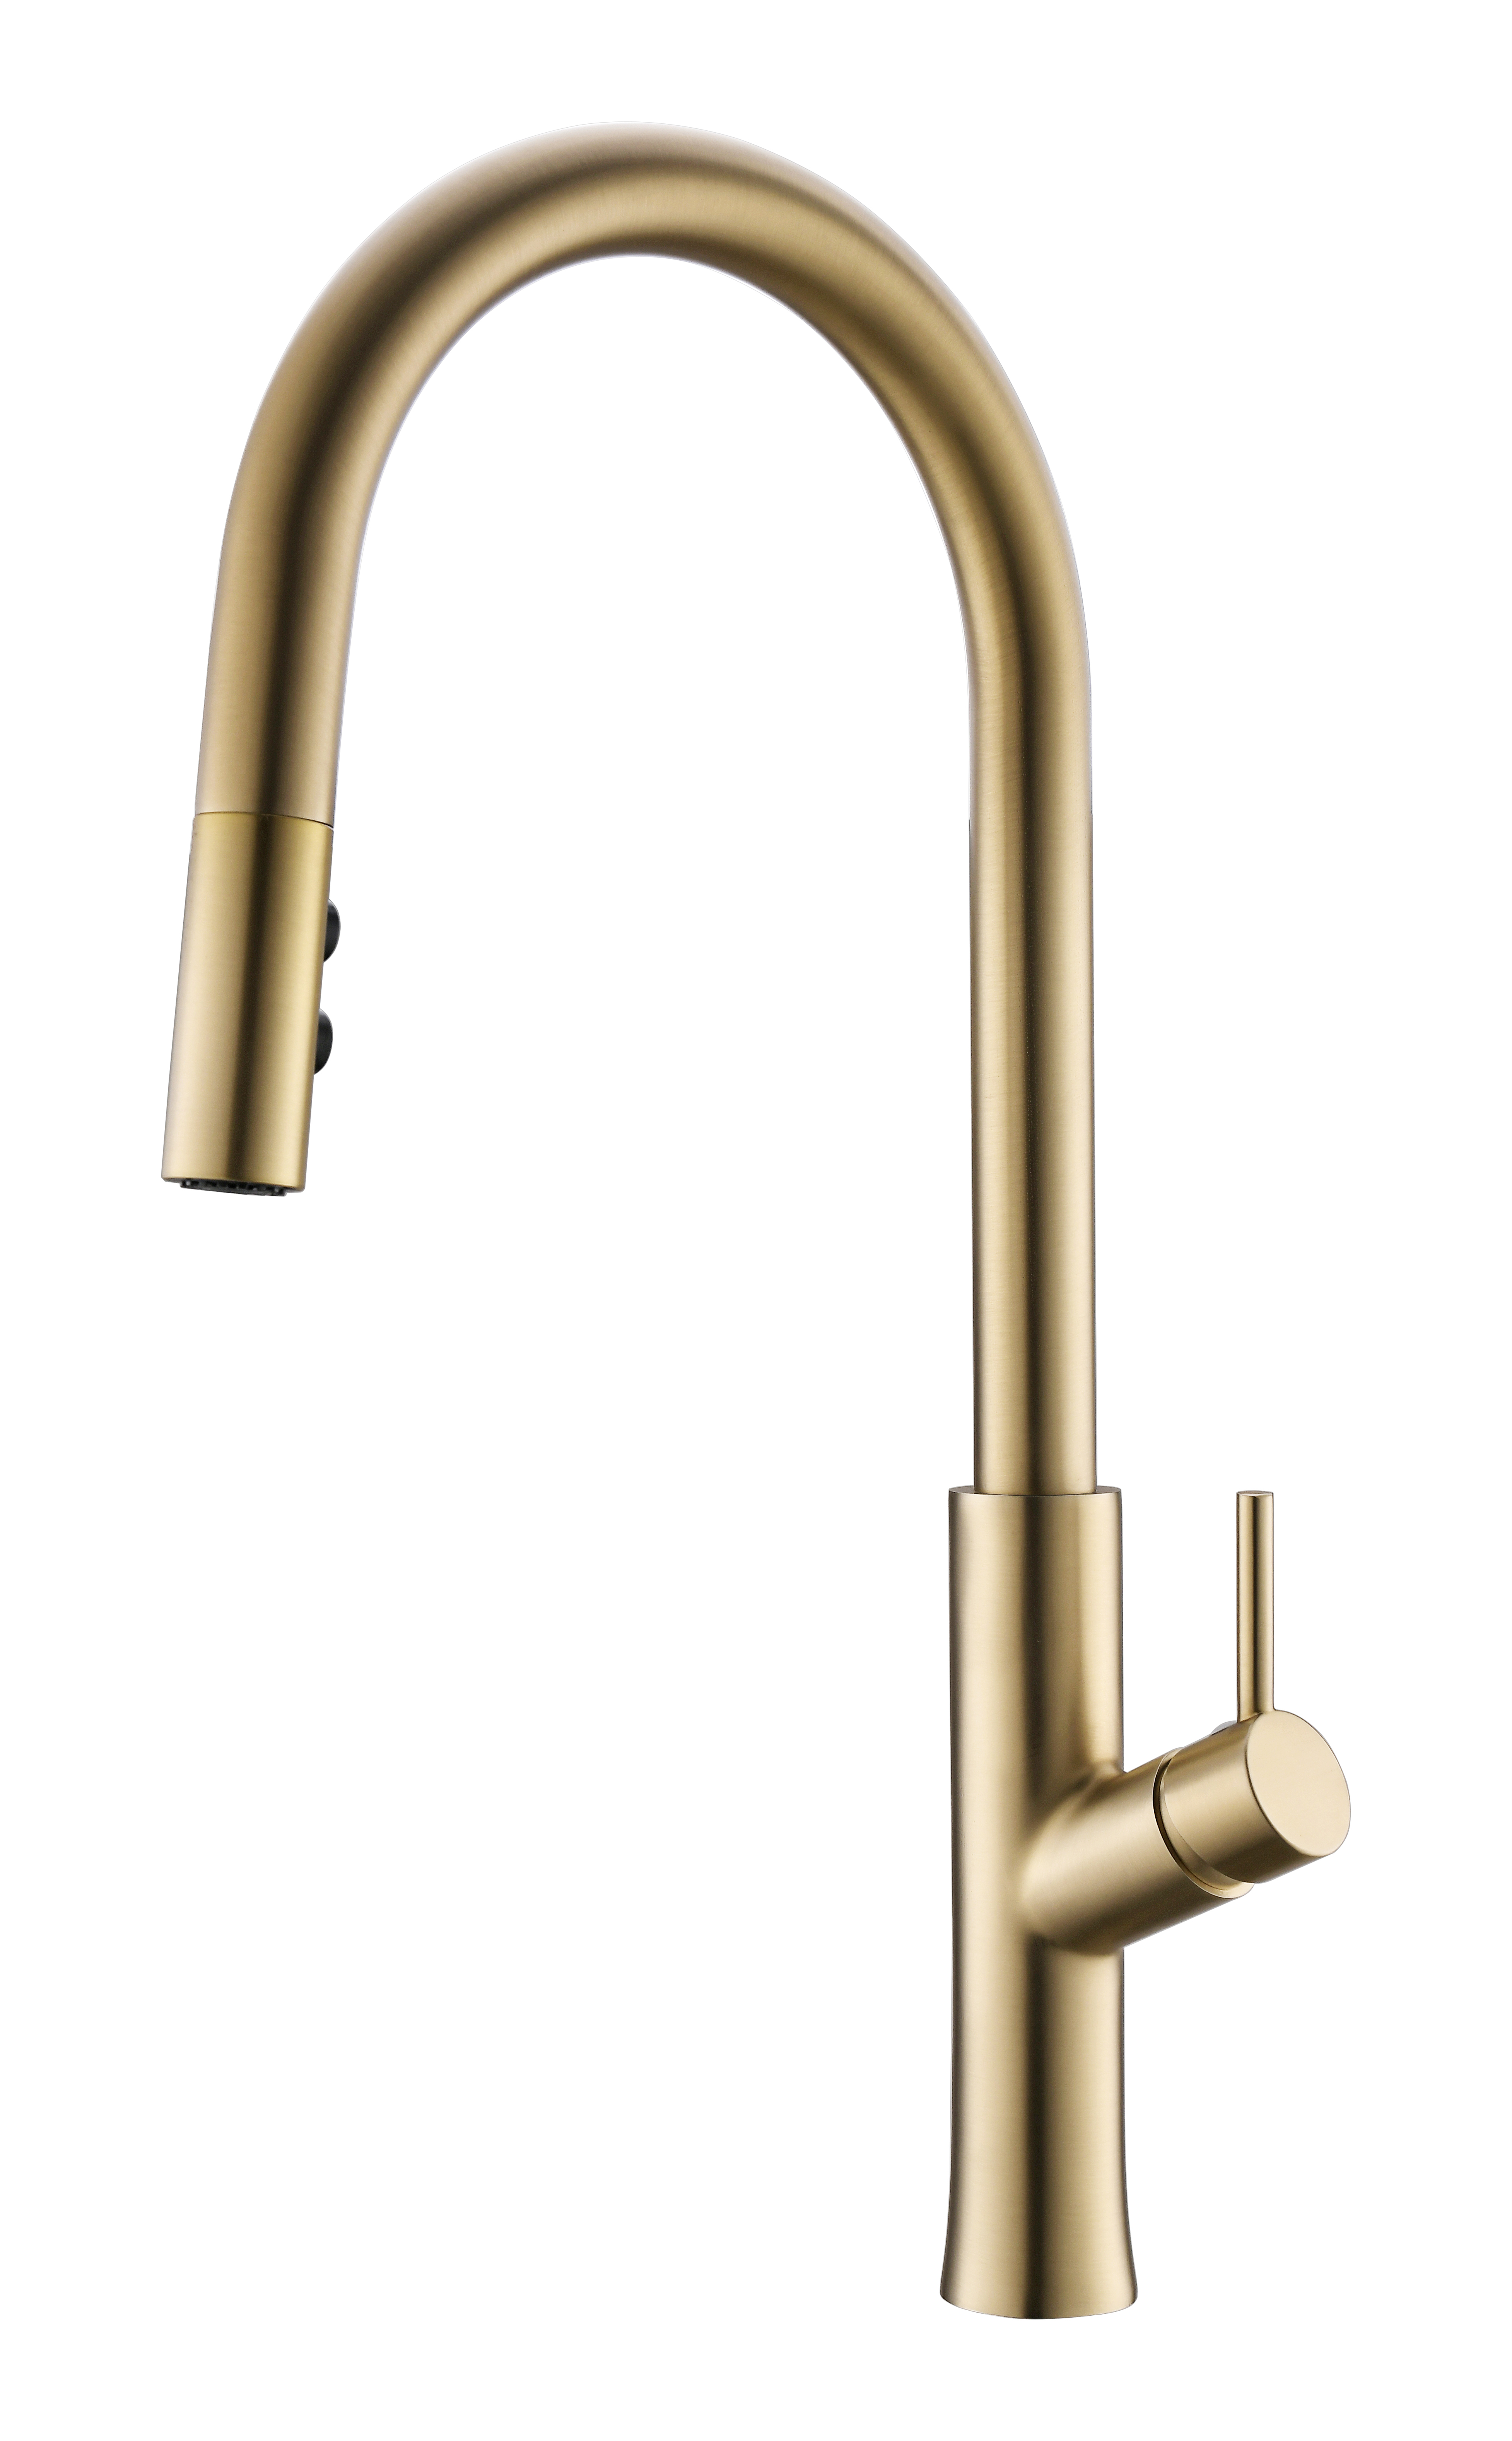 Hot Selling Bronze Faucet Sink Tap Taps Kitchen Mixer With Ce Certificate